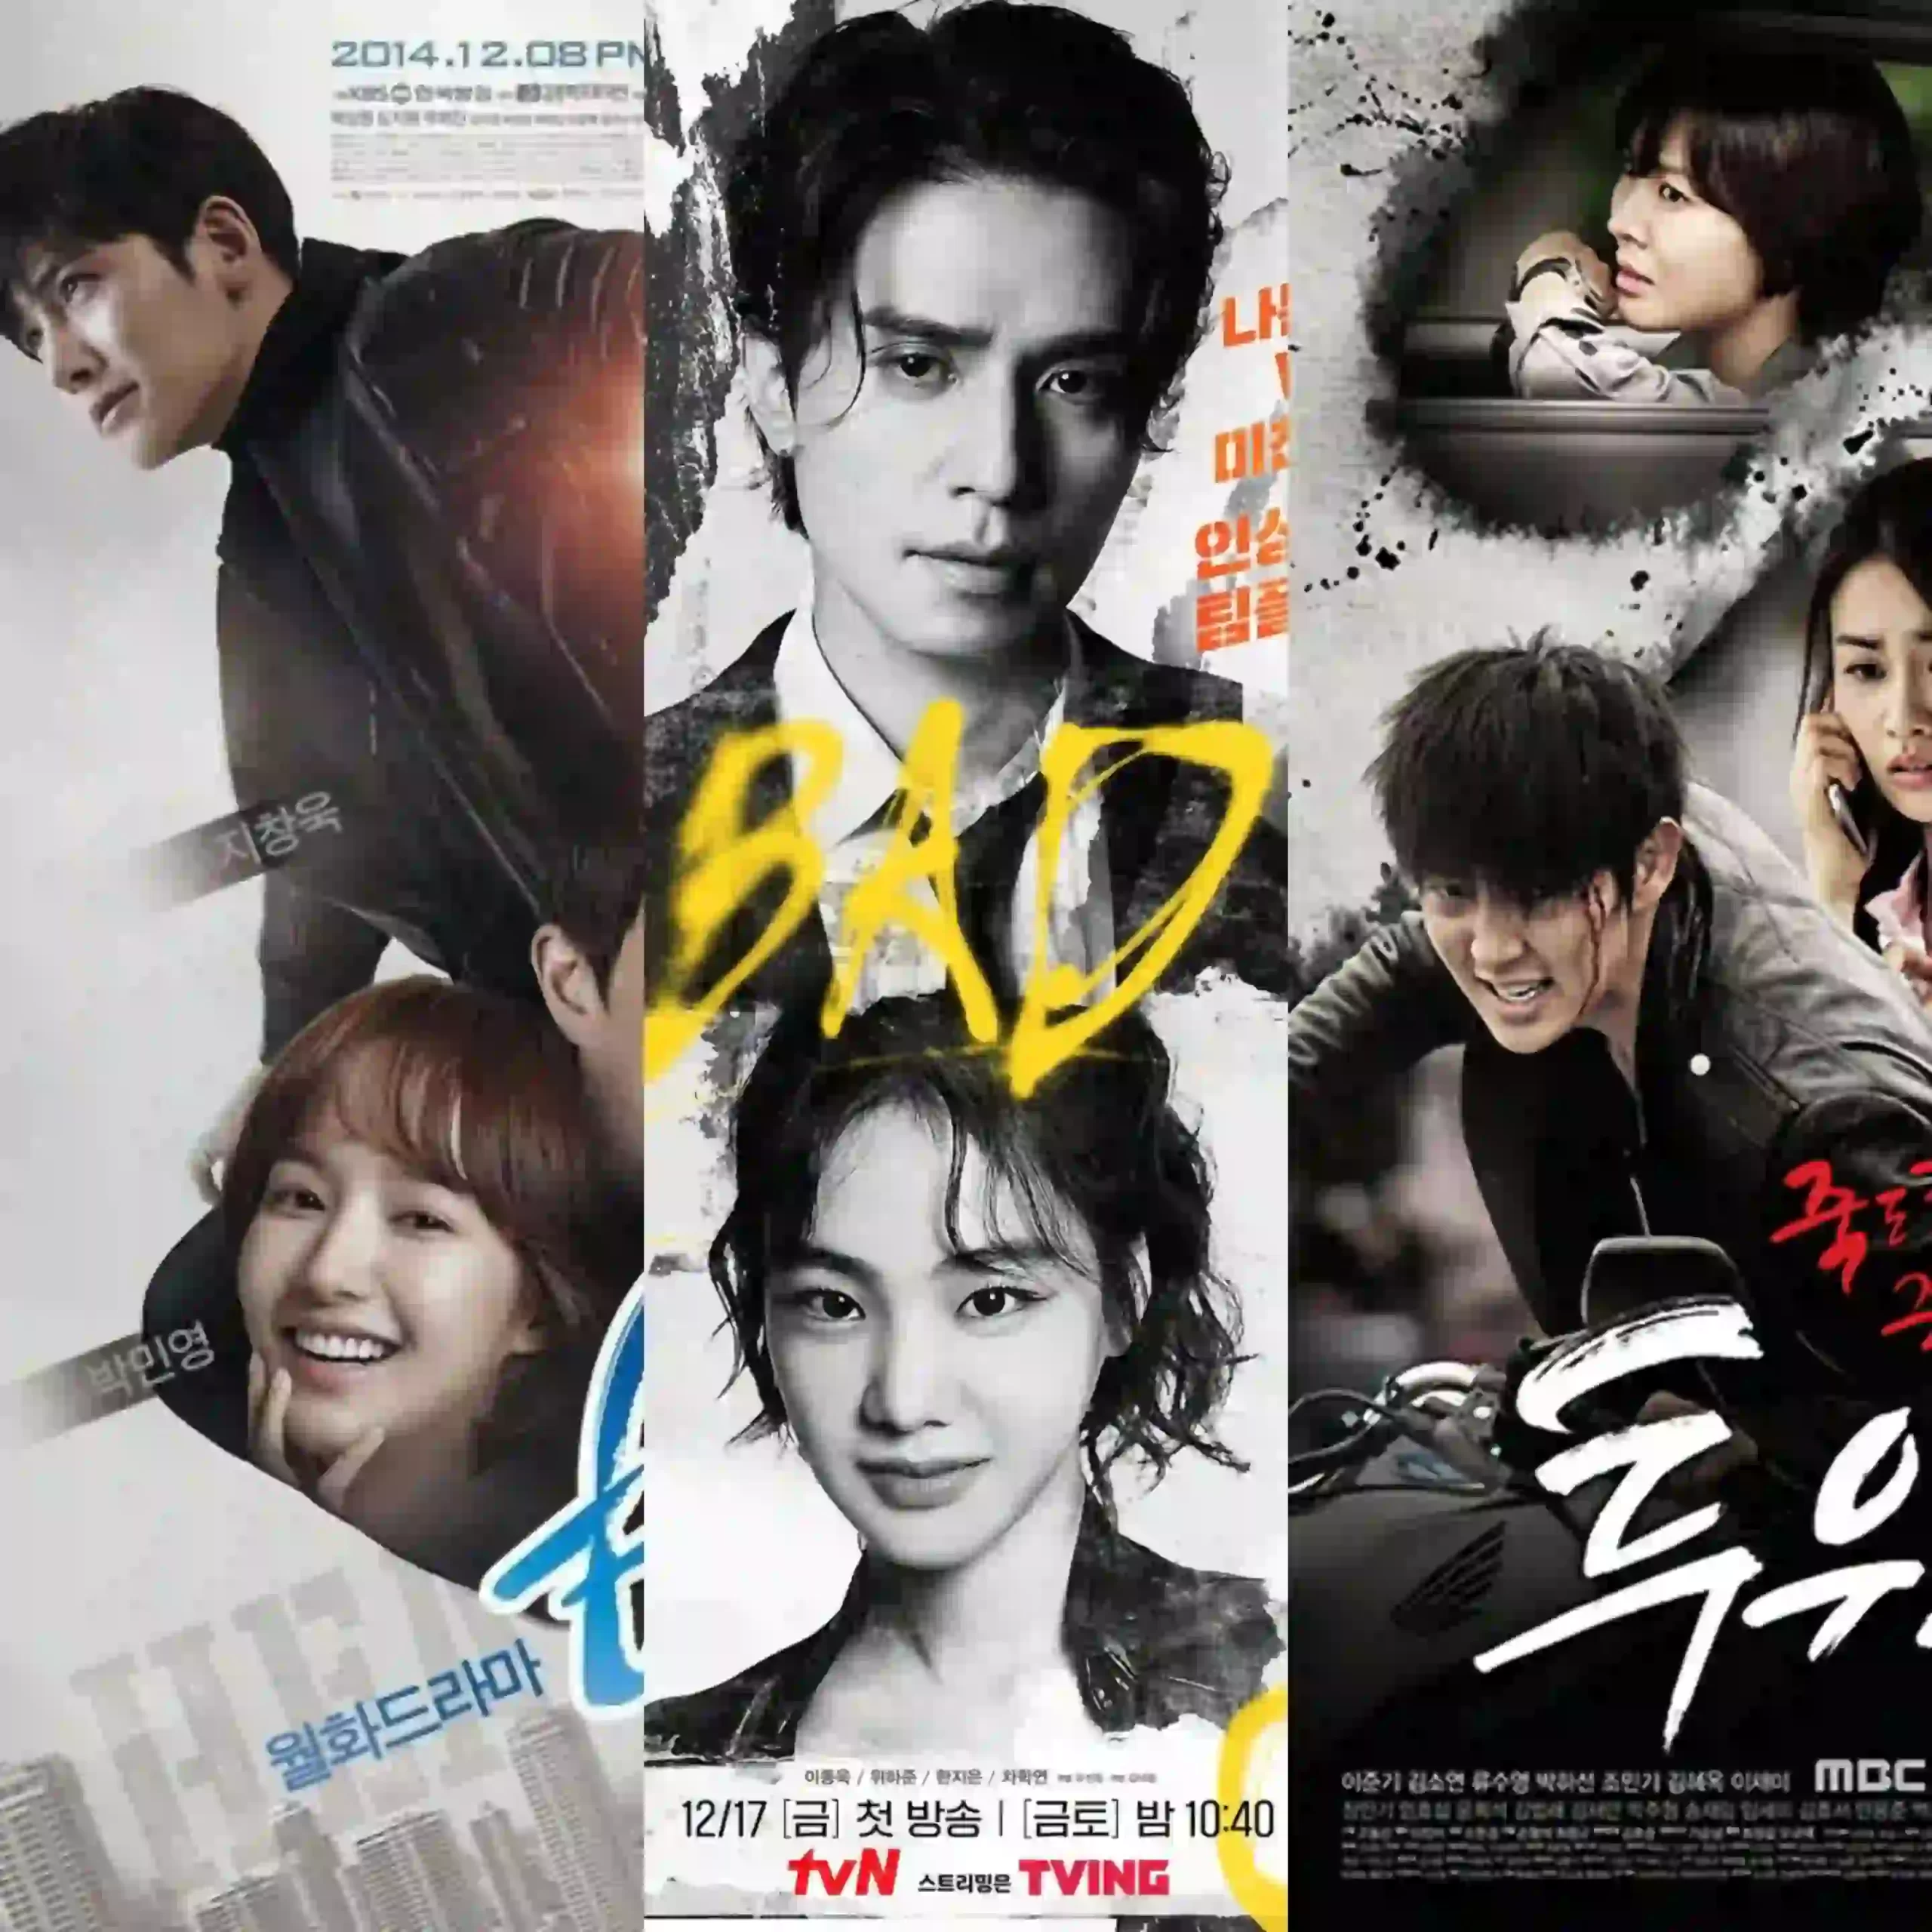 Action thriller and mystery kdrama to watch